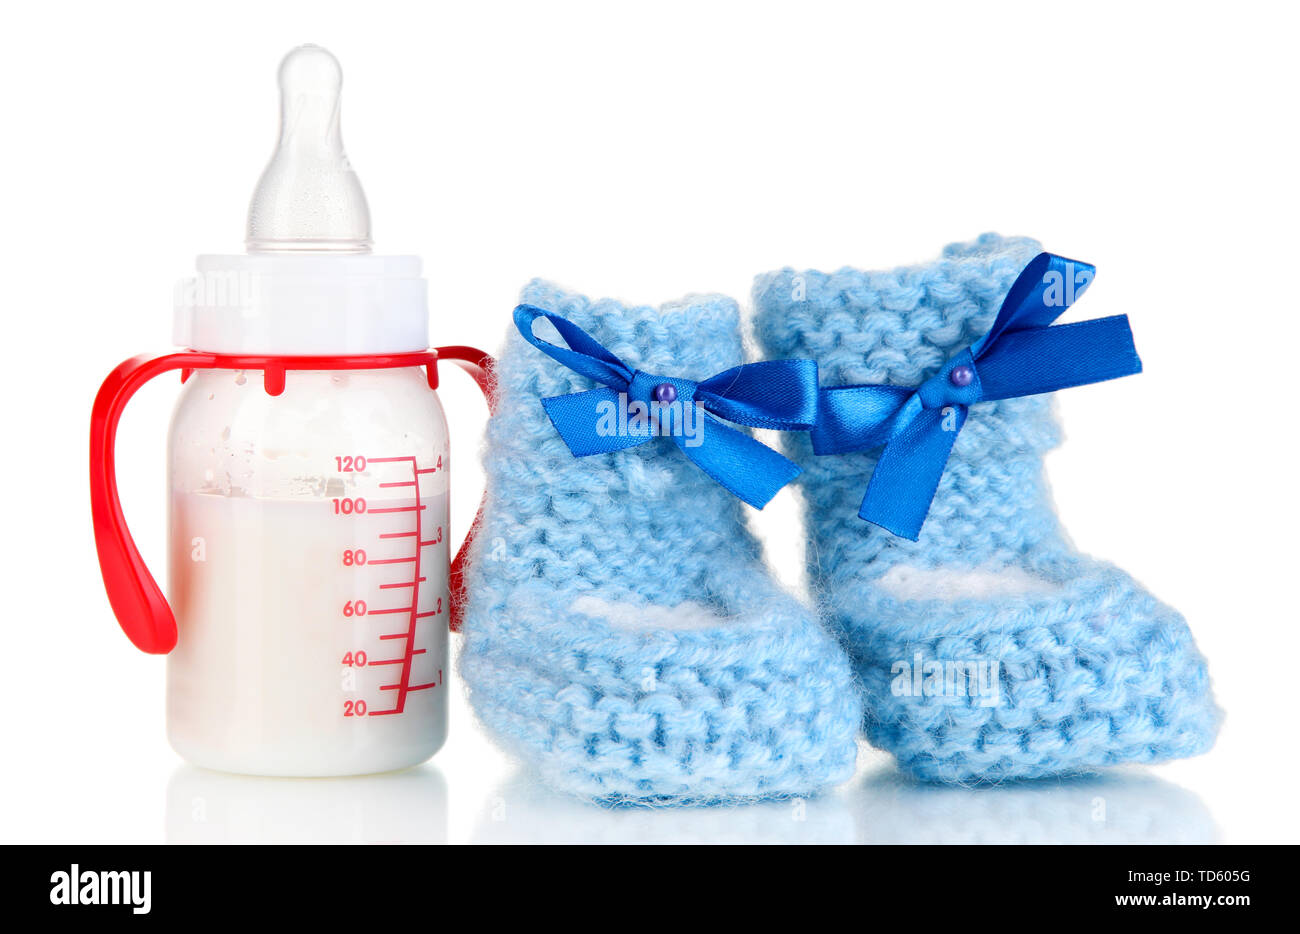 Bottle for milk formula with booties isolated on white Stock Photo